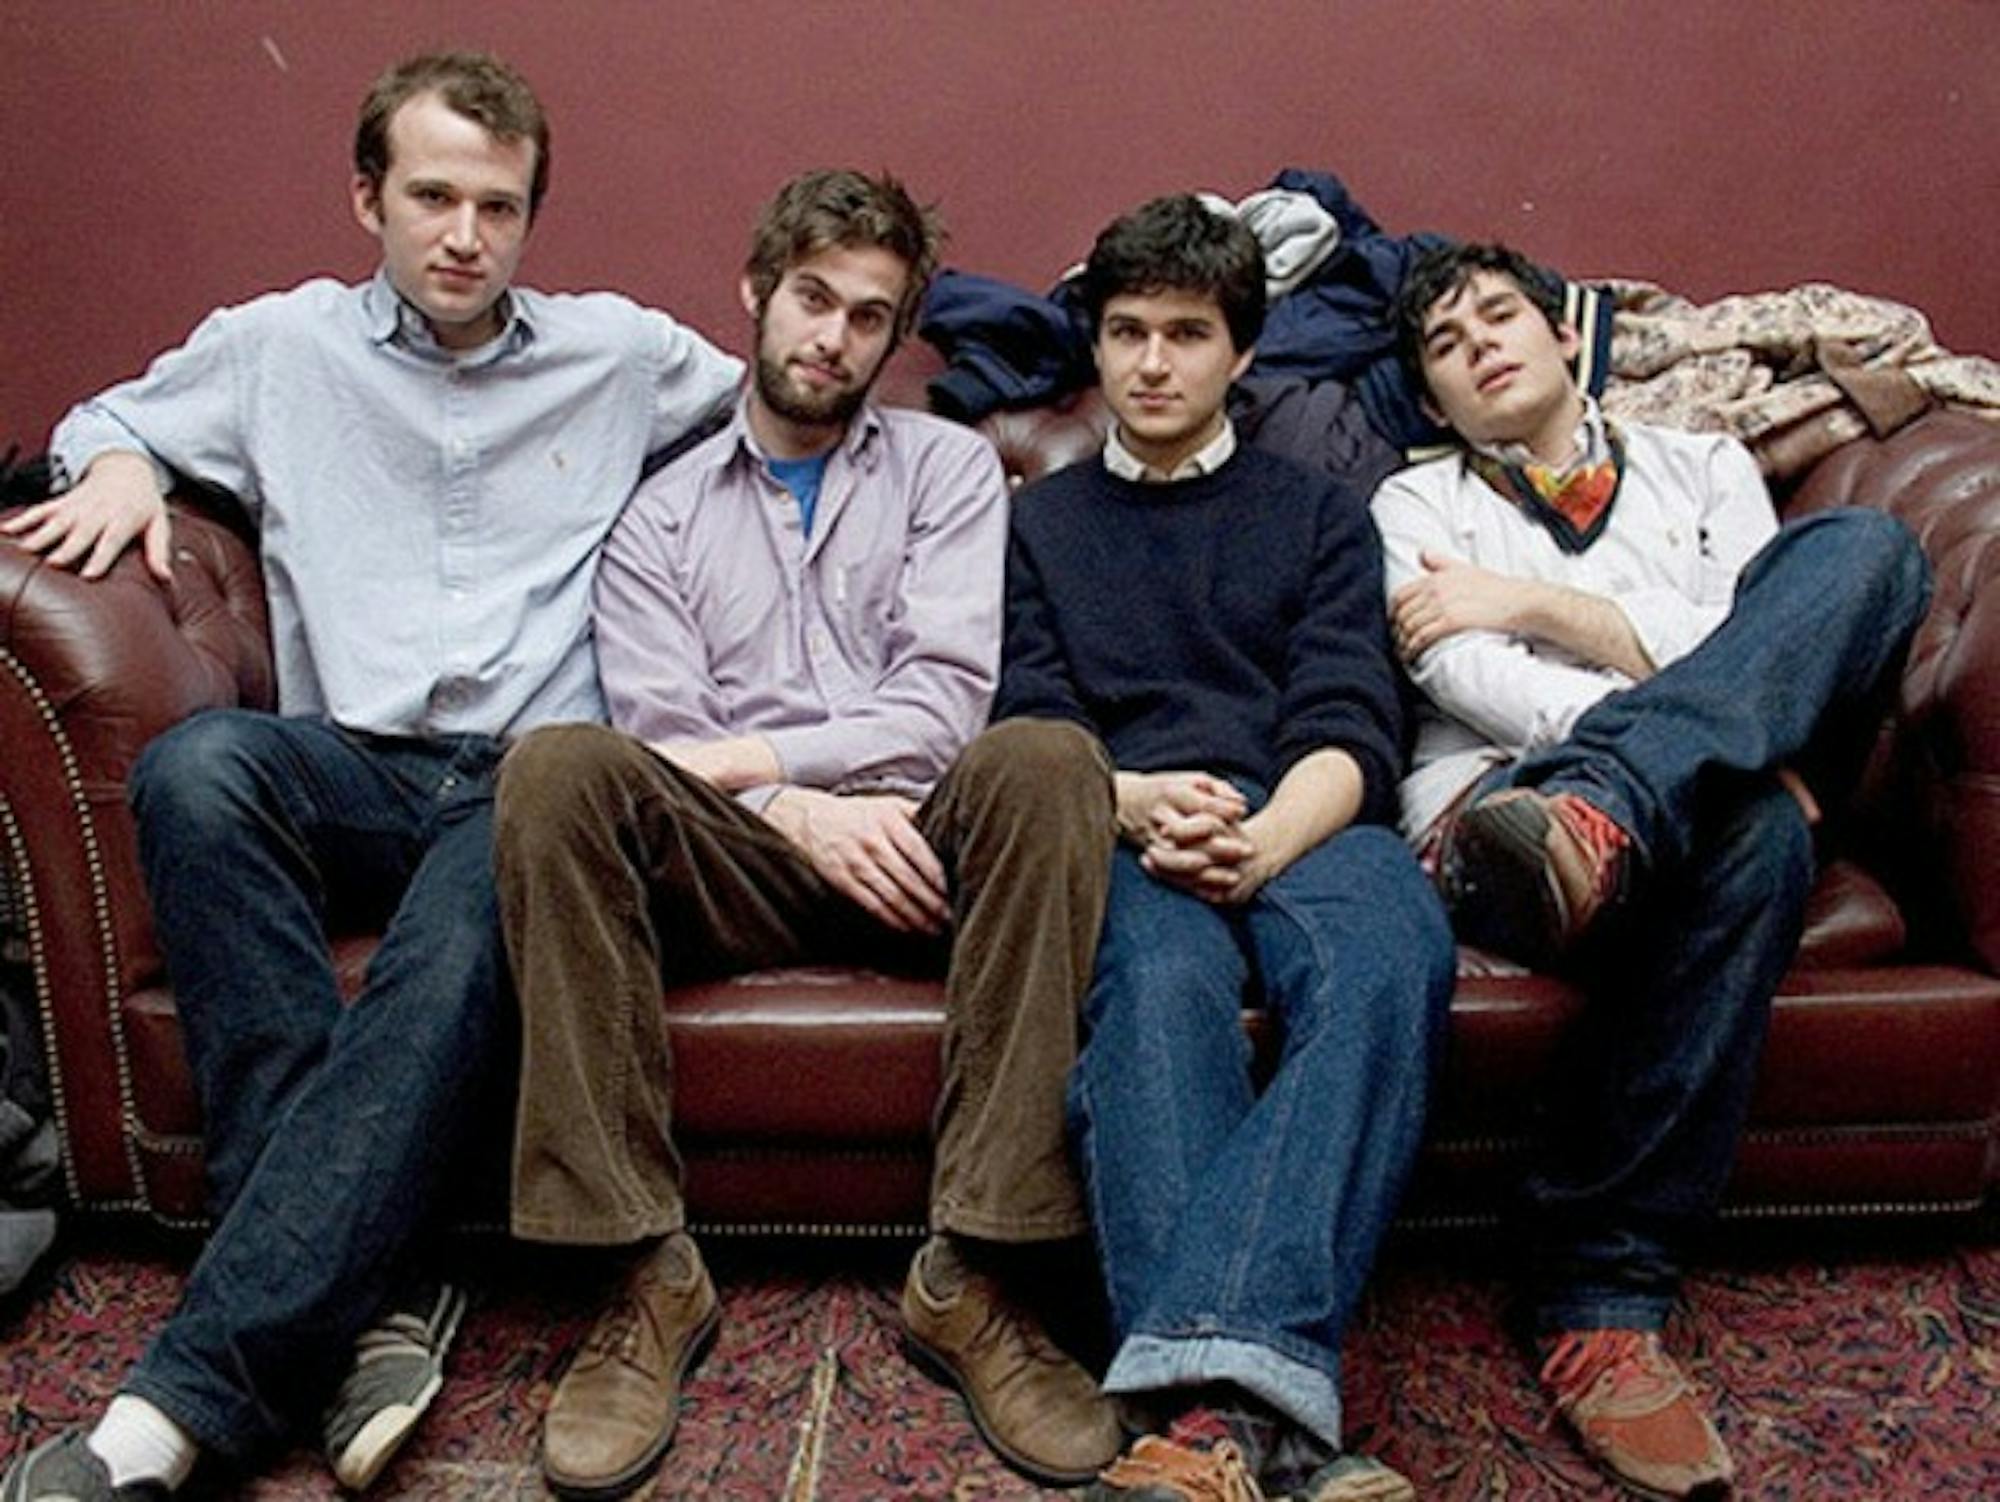 Columbia-bred Vampire Weekend, runners-up in Ivygate's battle of the bands, released a debut album this month.